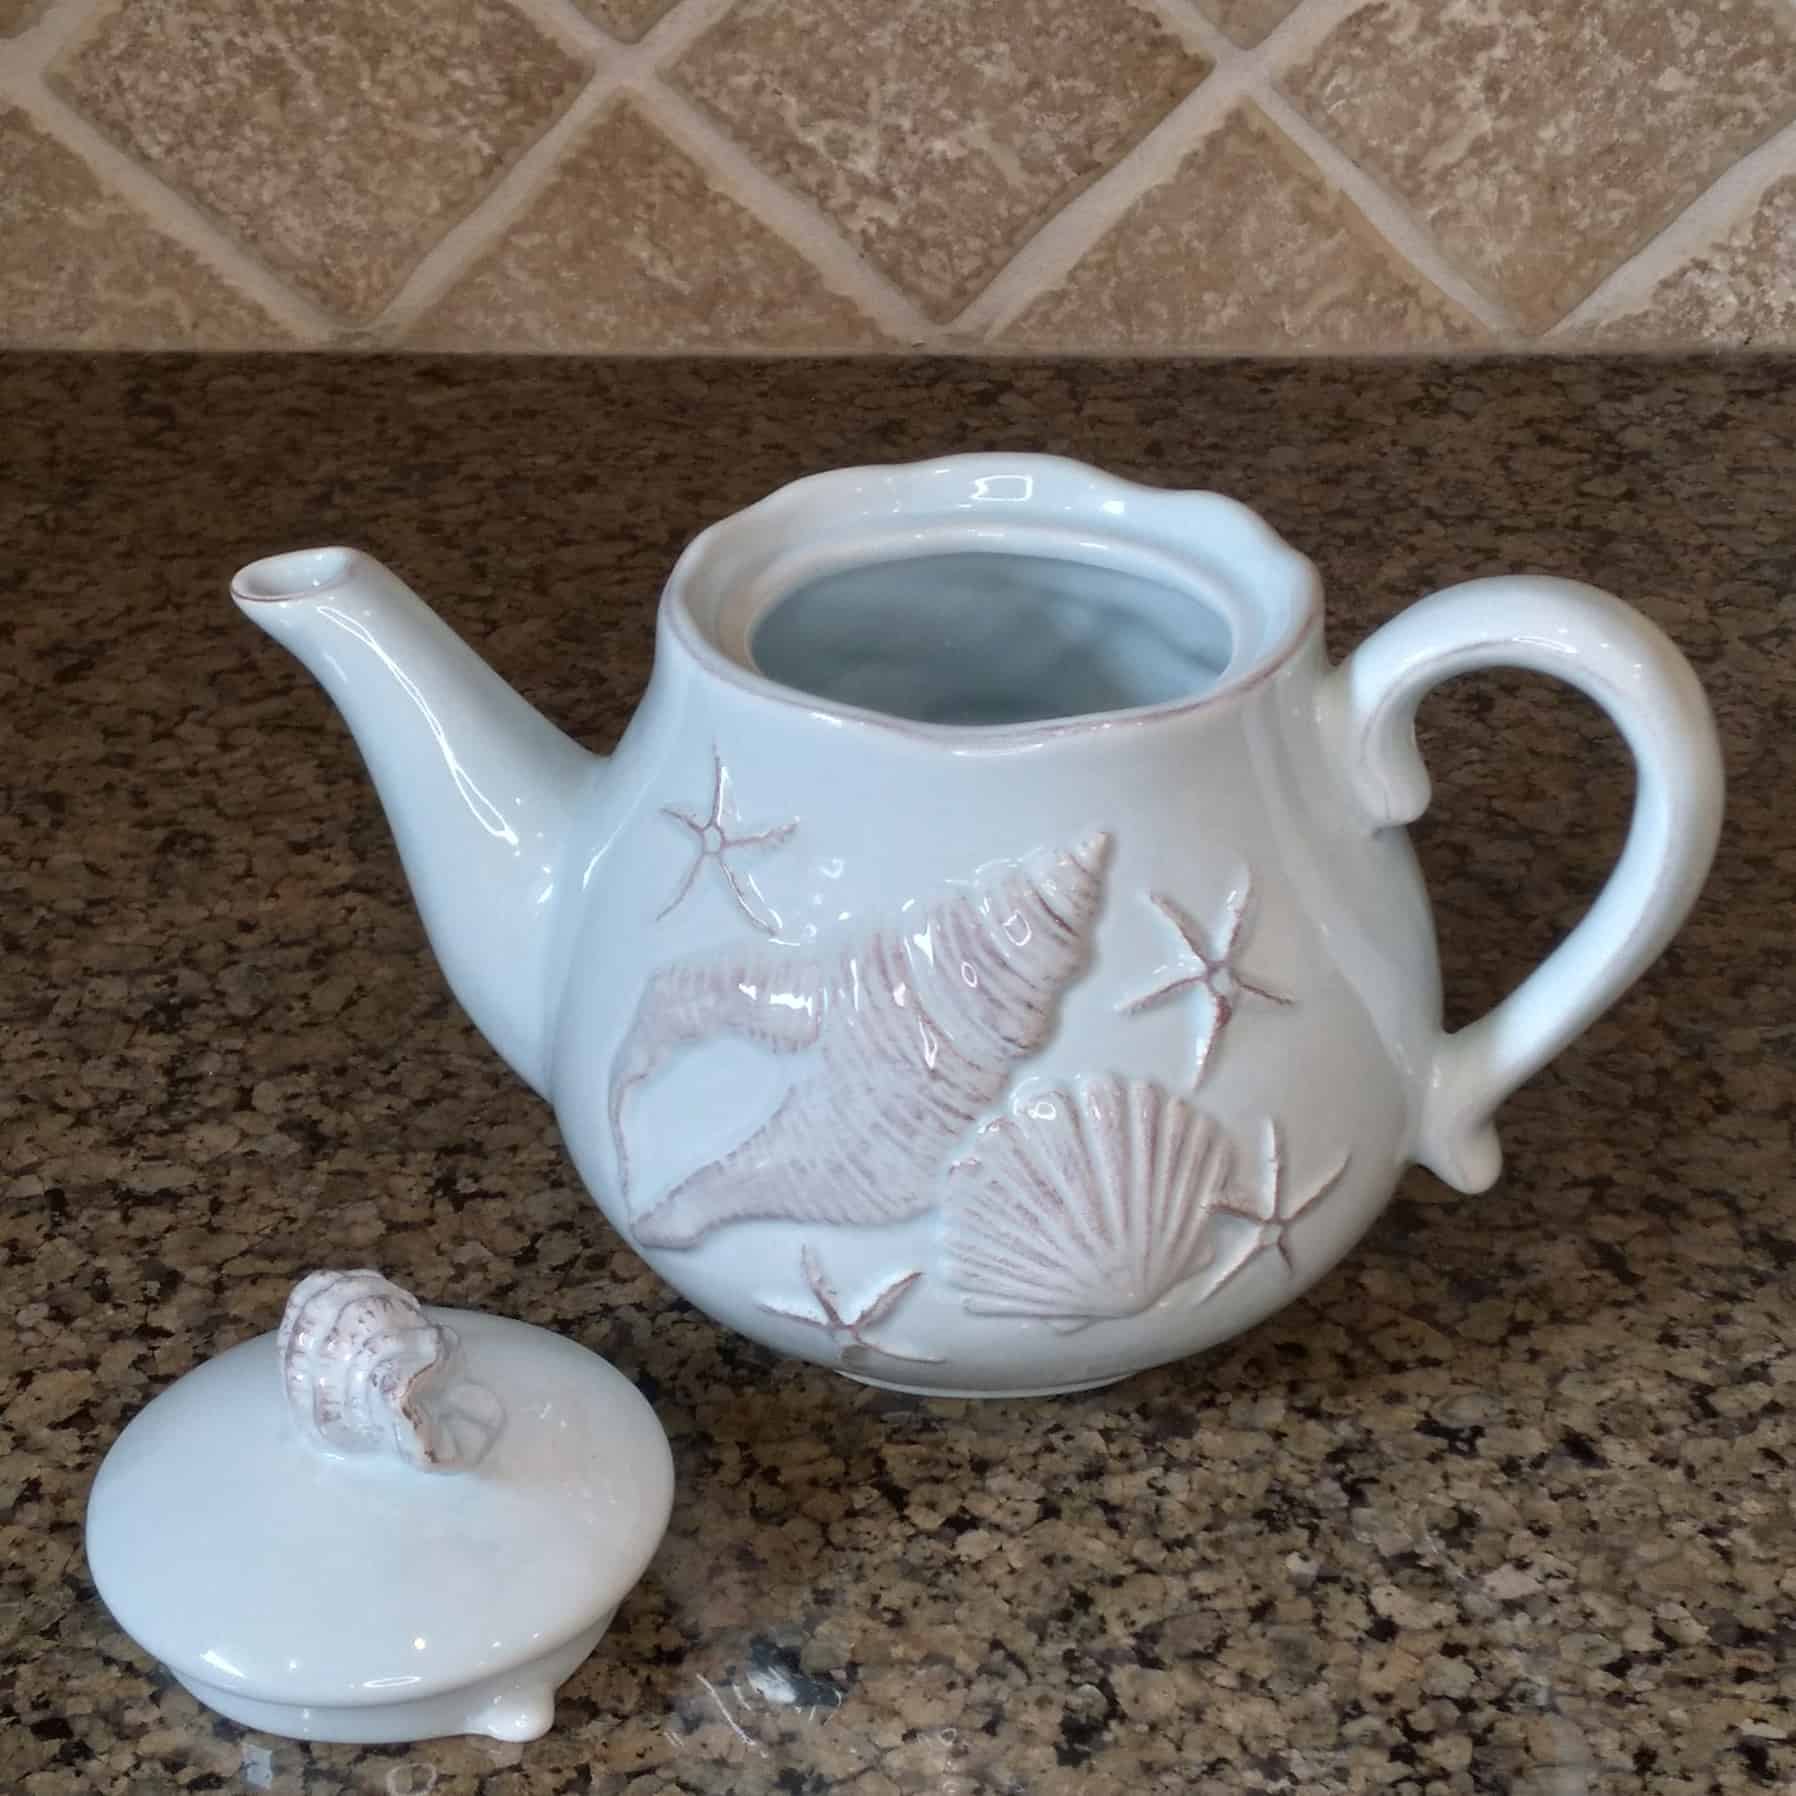 This Laguna Coastal Shell Teapot Blue Decorative Sea Life Home Decor by Blue Sky is made with love by Premier Homegoods! Shop more unique gift ideas today with Spots Initiatives, the best way to support creators.